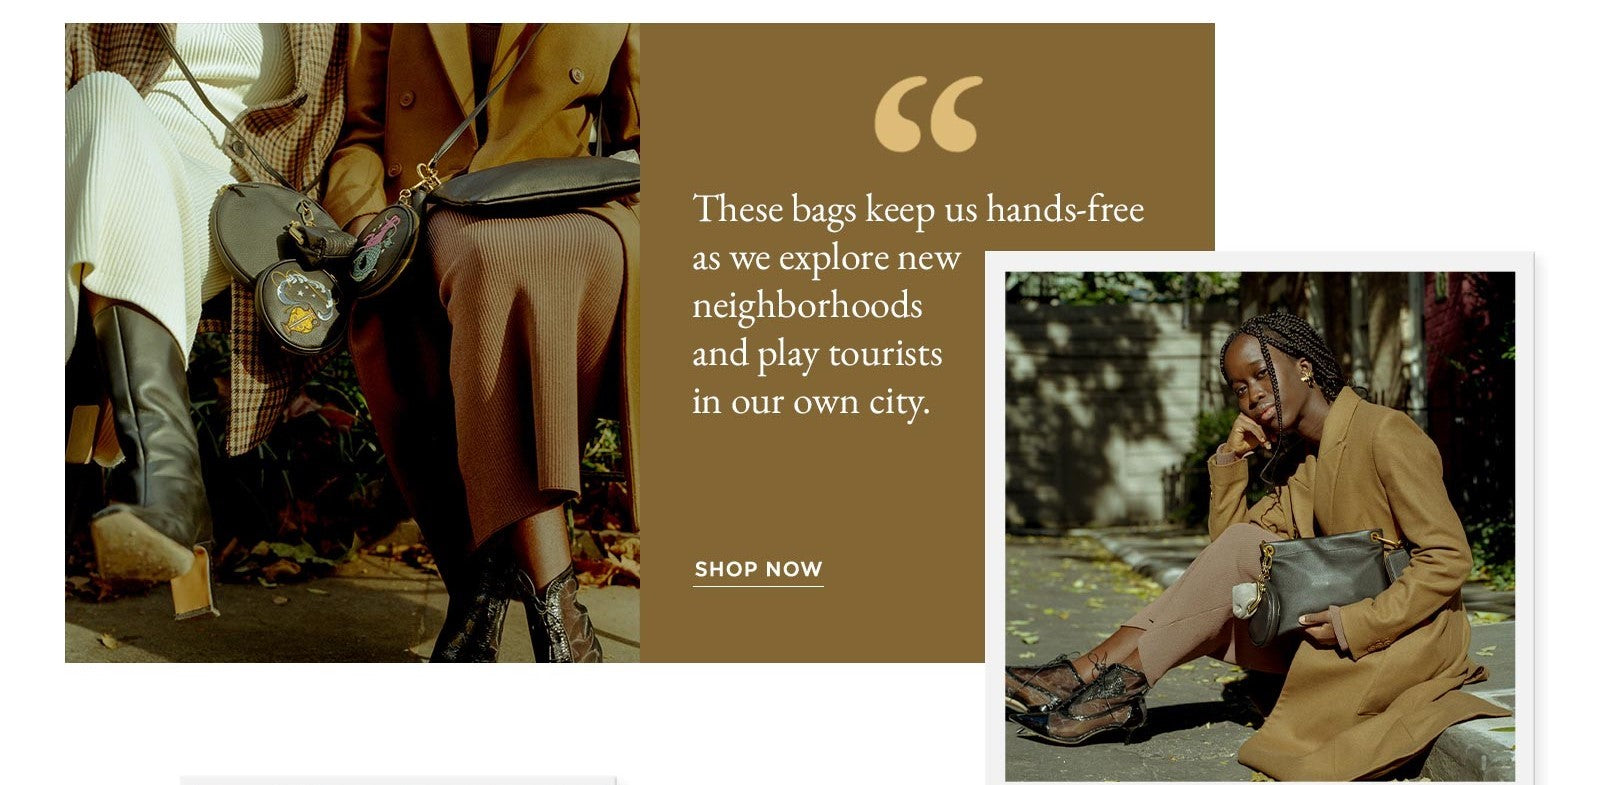 These bags keep us hands-free as we explore new neighborhoods and play tourists in our own city. Shop HOBO GO Now